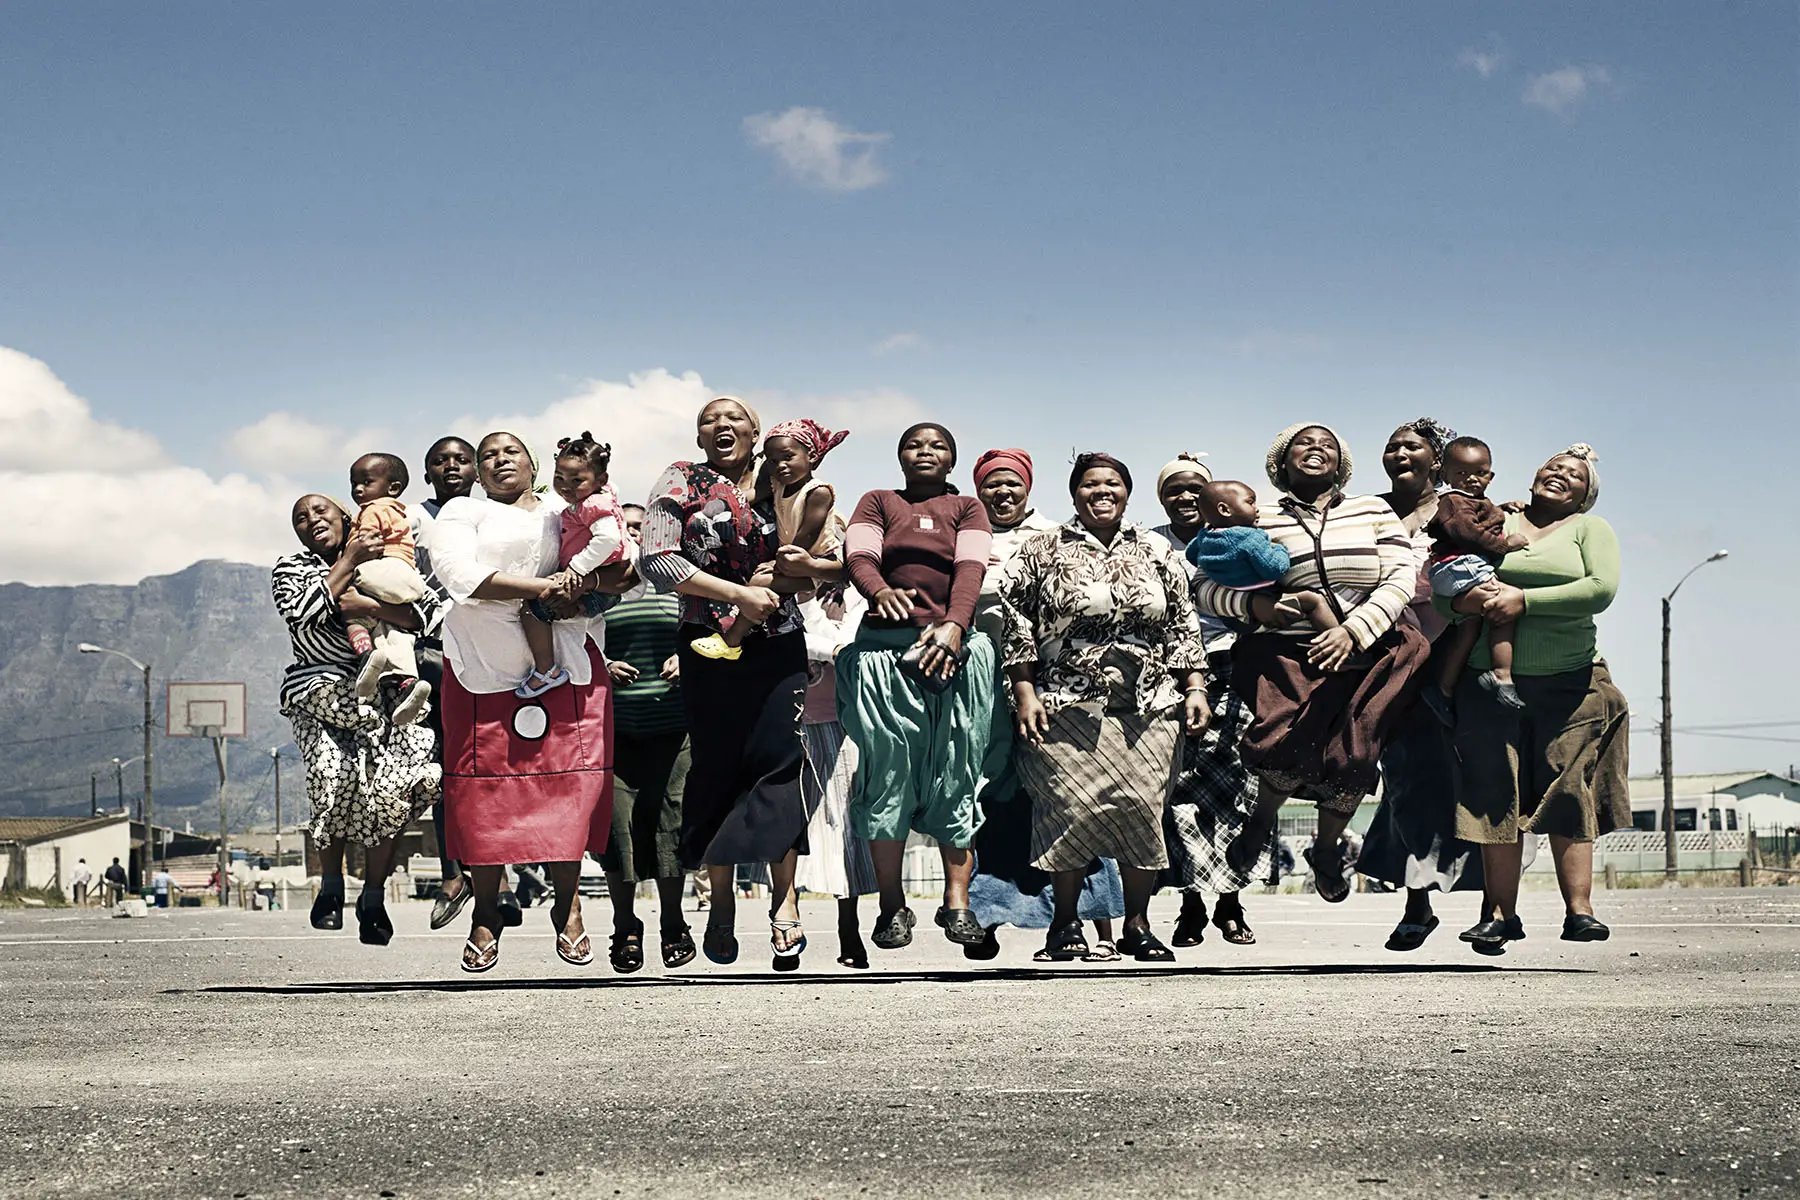 Group of women and children jumping and laughing, outside, mountain in background, Western Cape